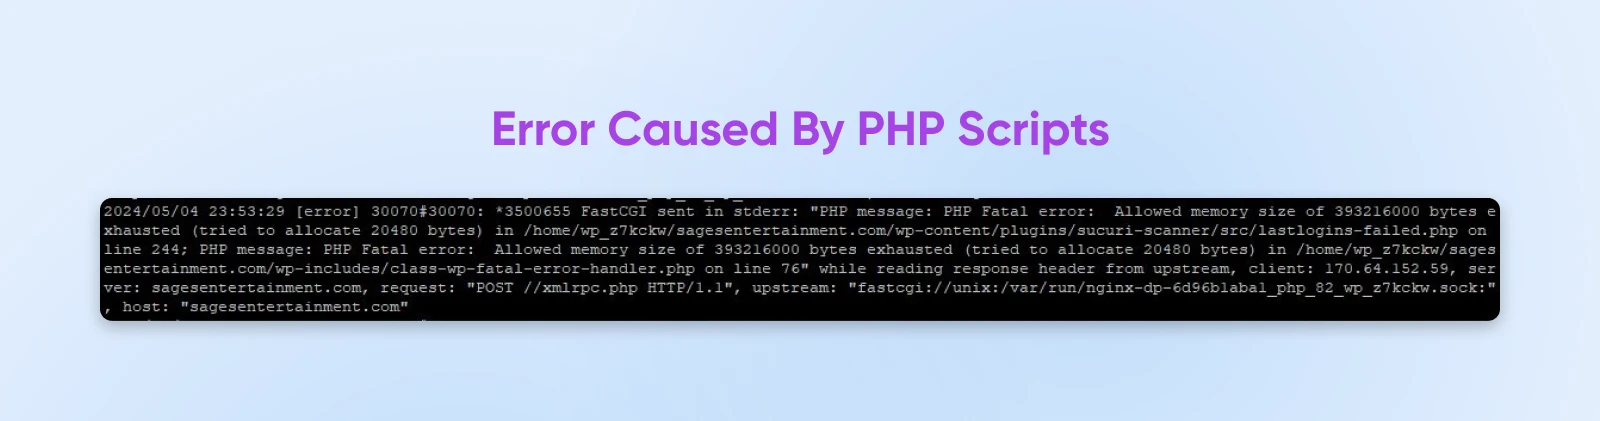 "Error Caused By PHP Scripts" header with code in a black background screenshot.